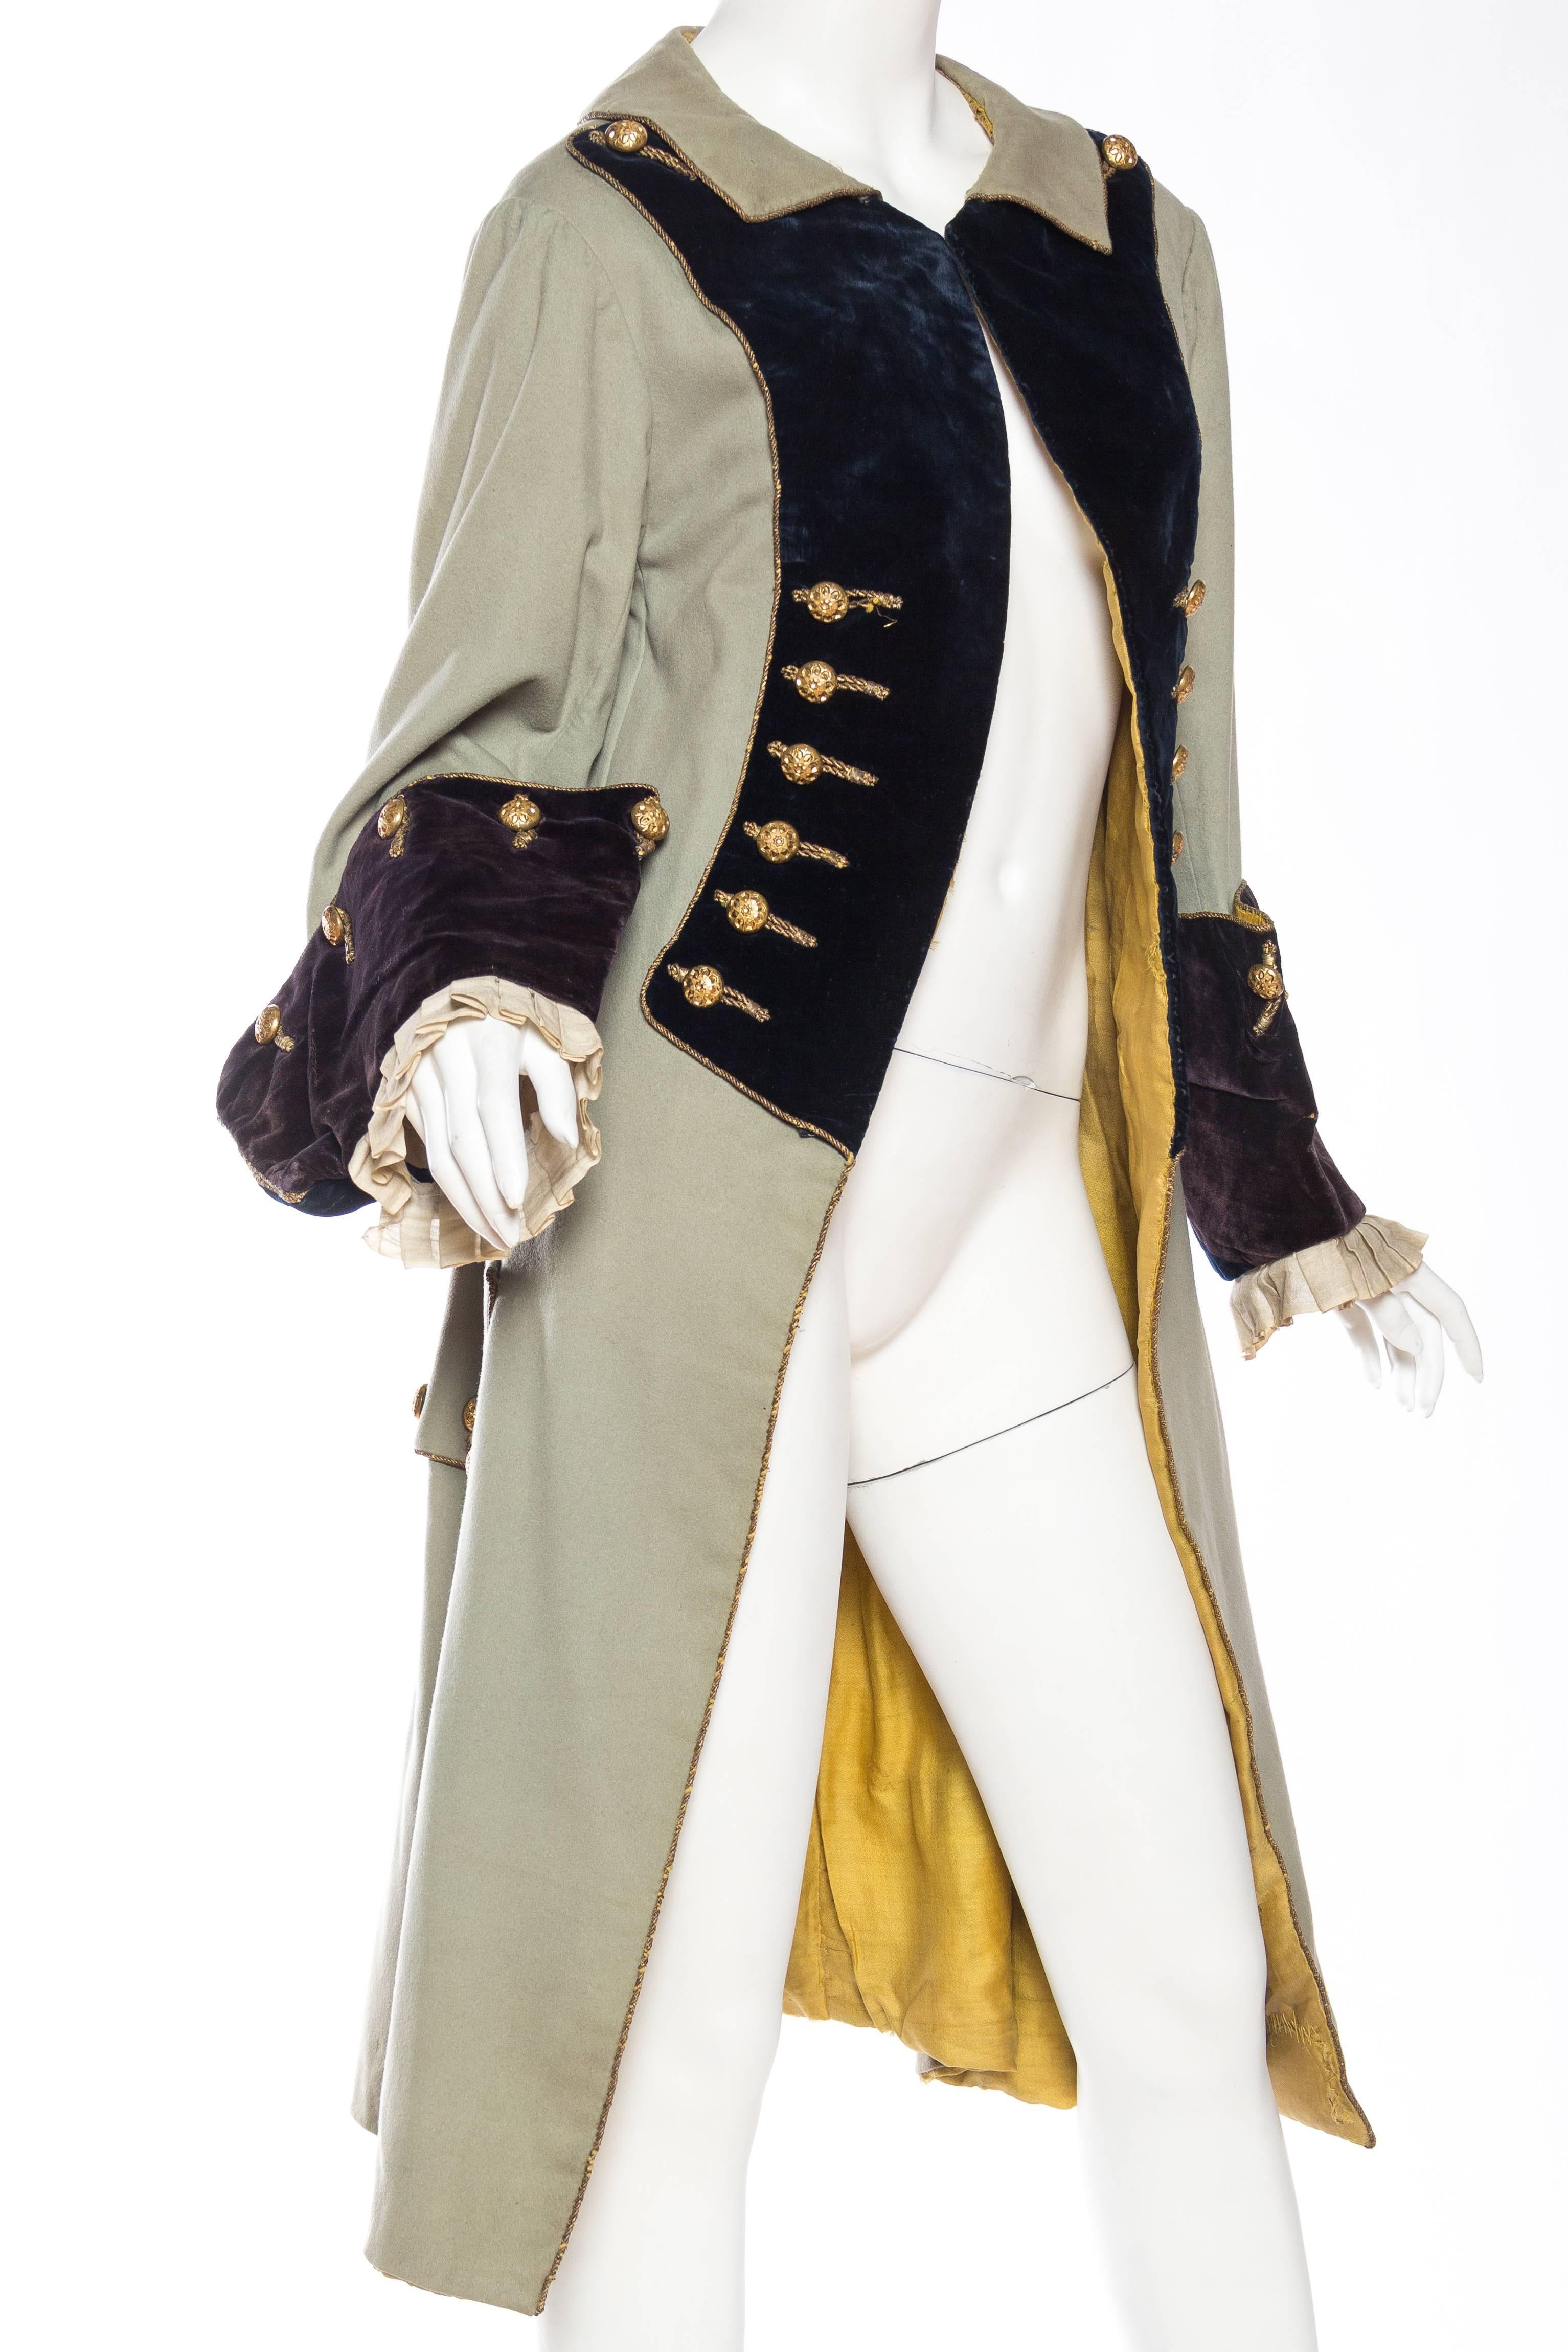 18th century frock coat for sale